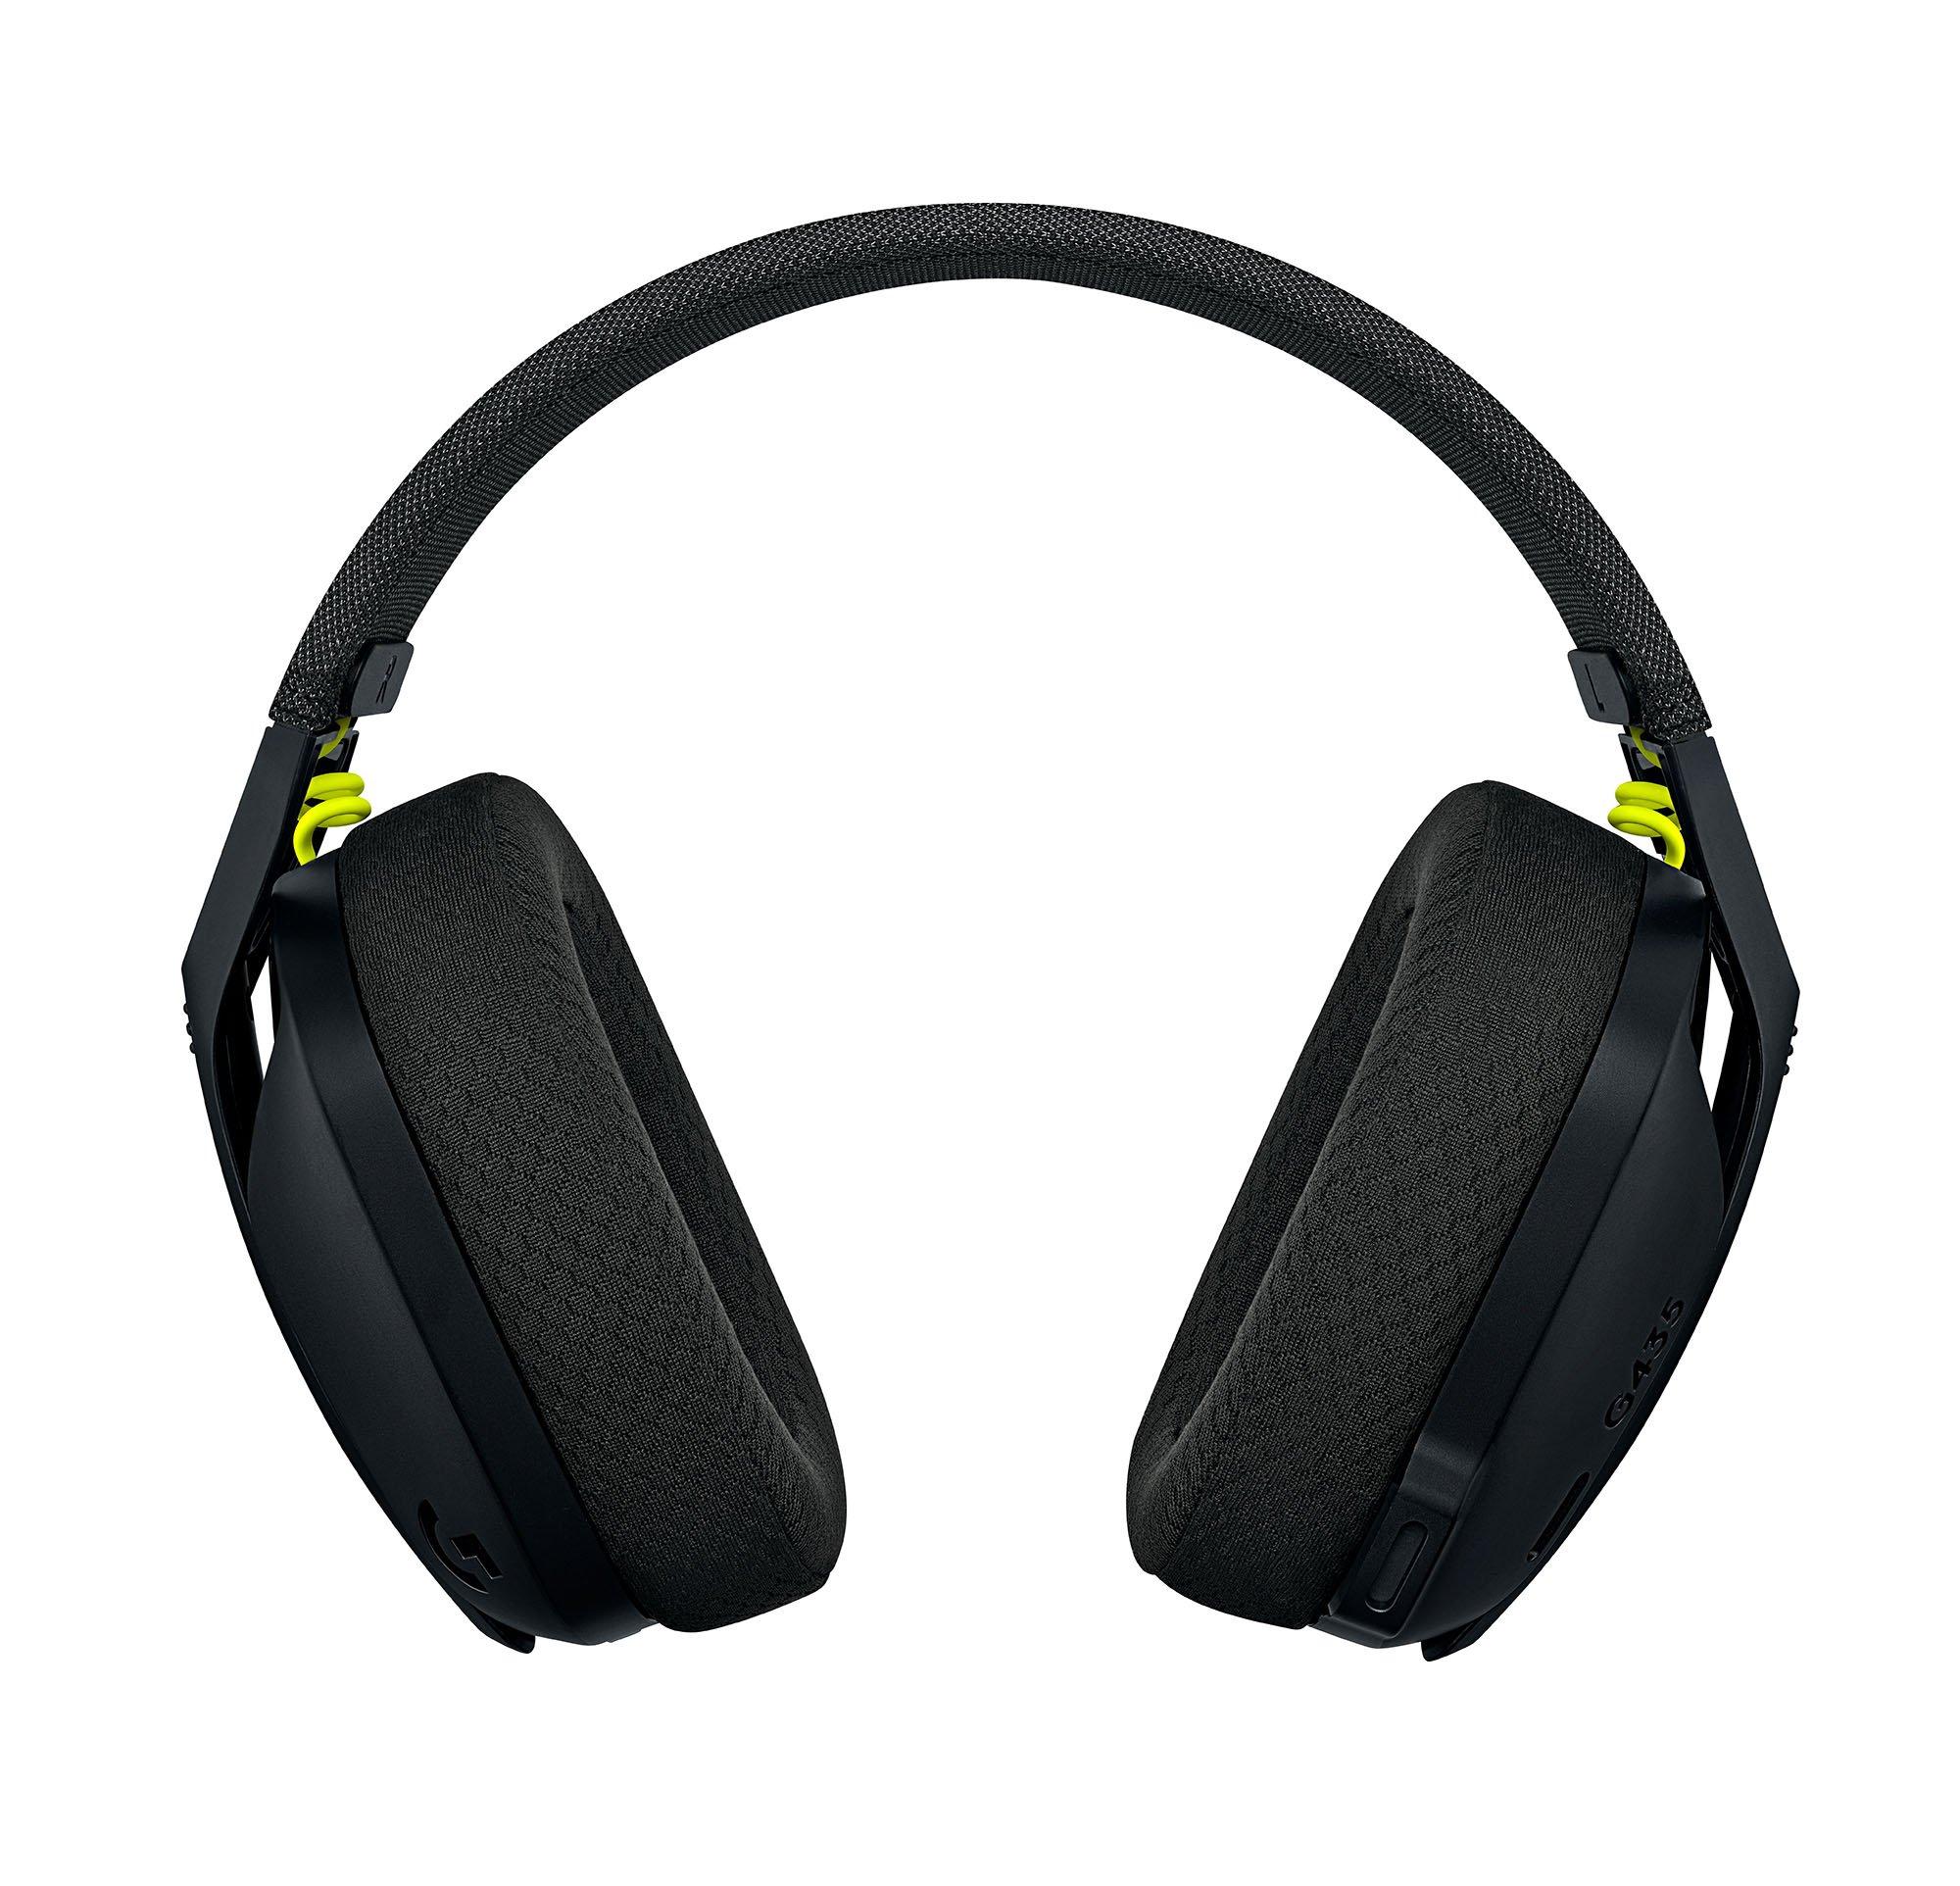 list item 2 of 6 Logitech G435 Wireless Gaming Headset for PC